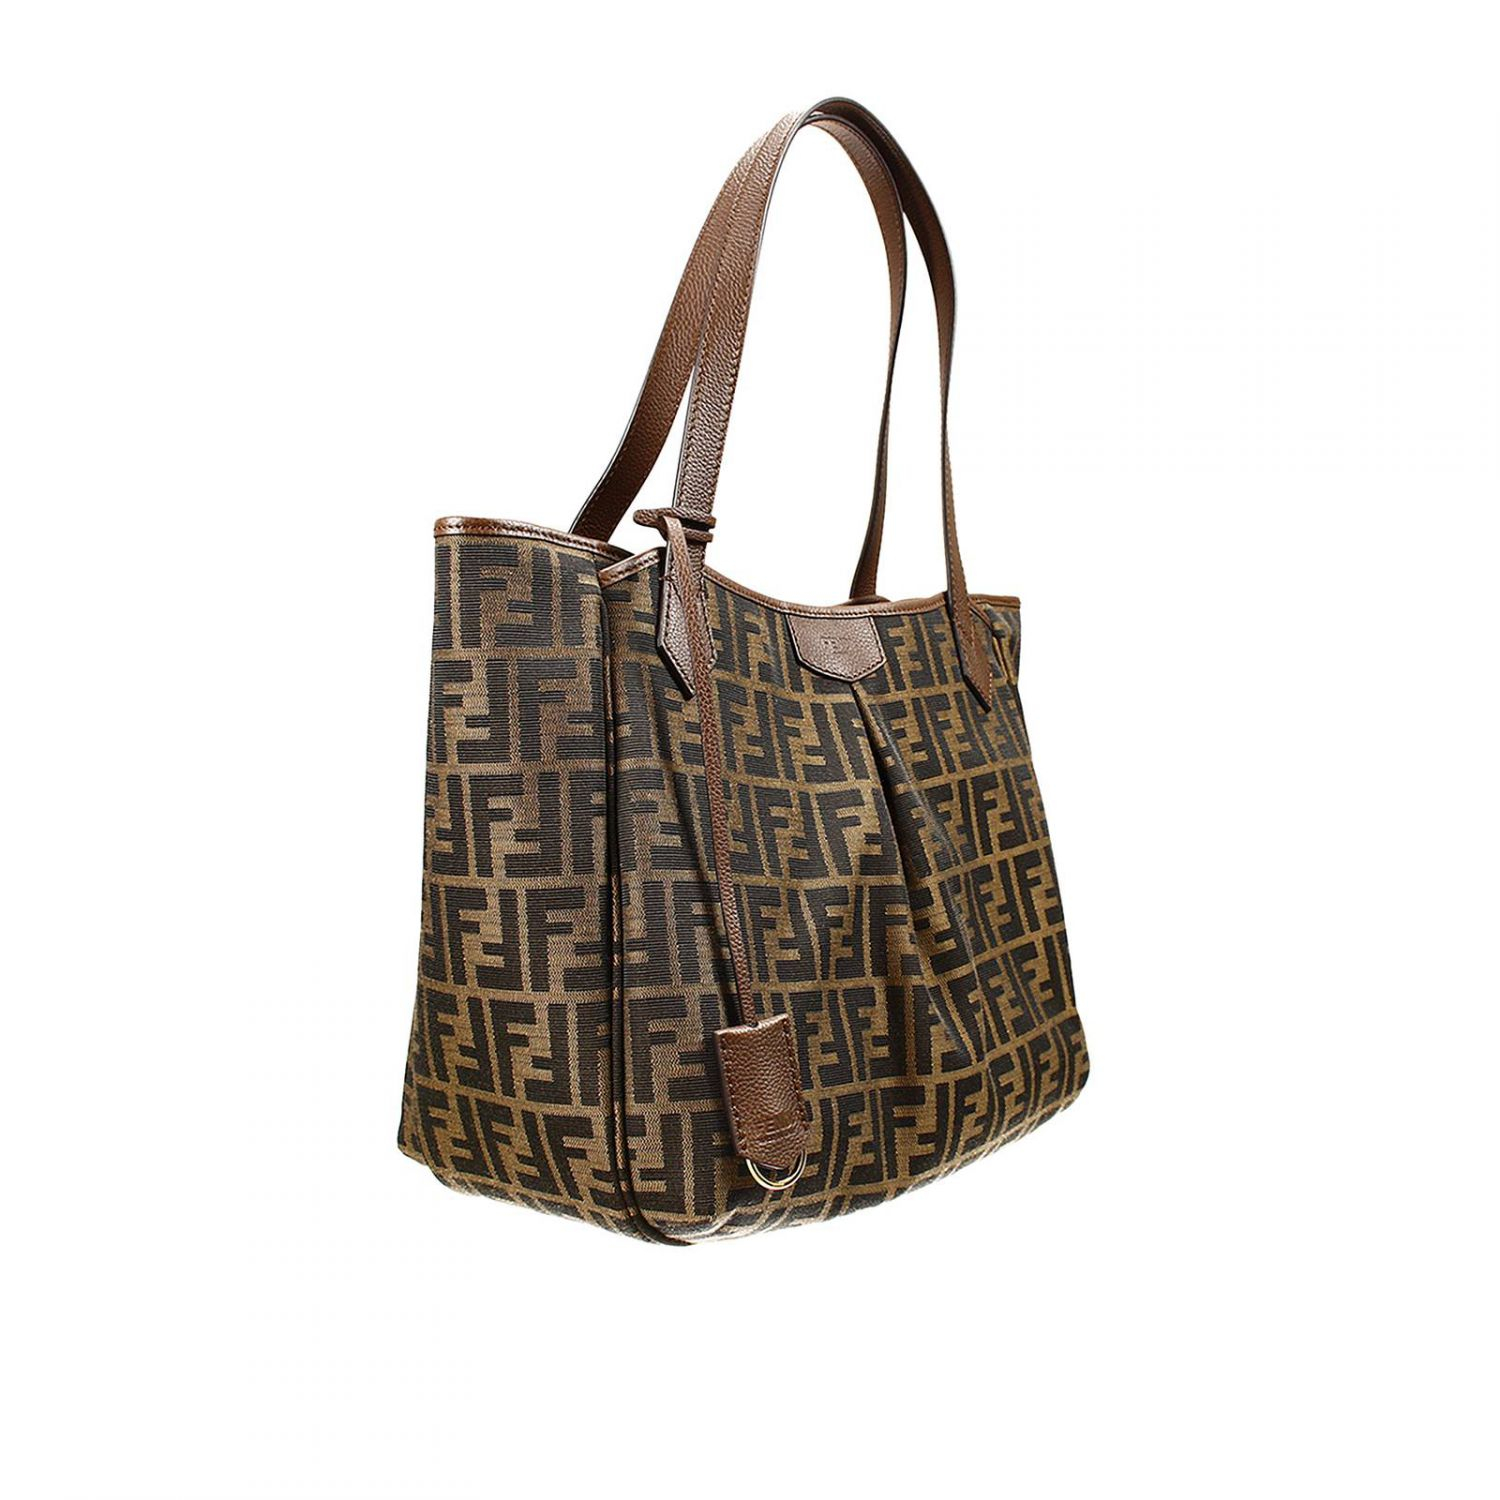 Fendi Handbag Shopping With Zip Zucca Large in Brown | Lyst